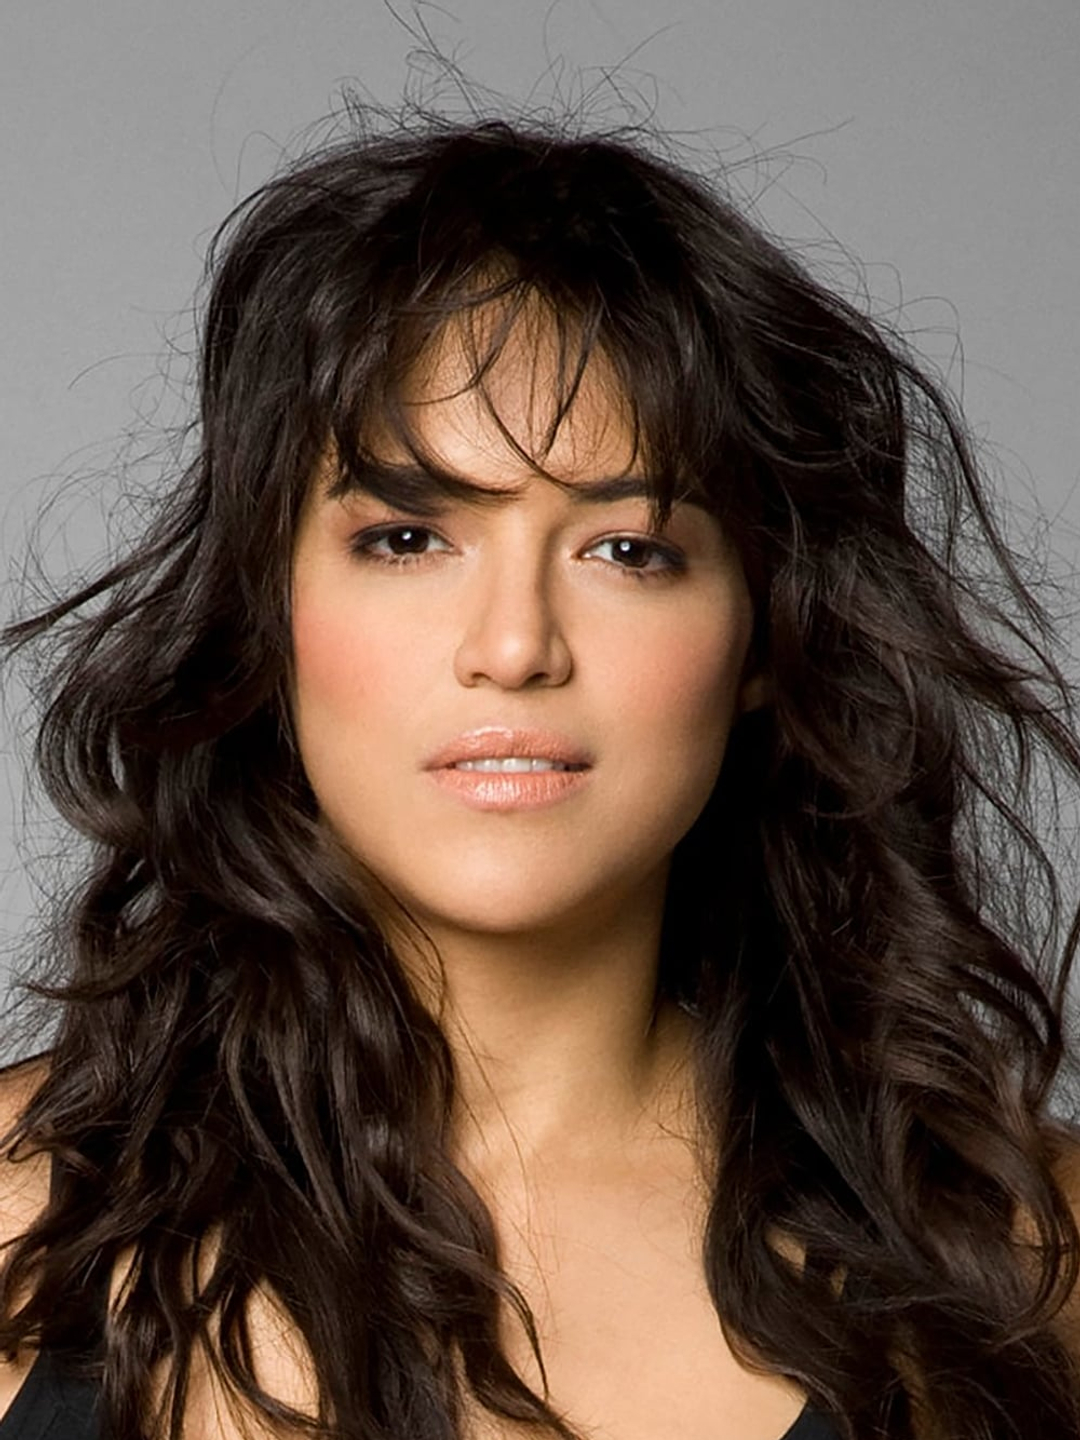 Michelle Rodriguez way to fame